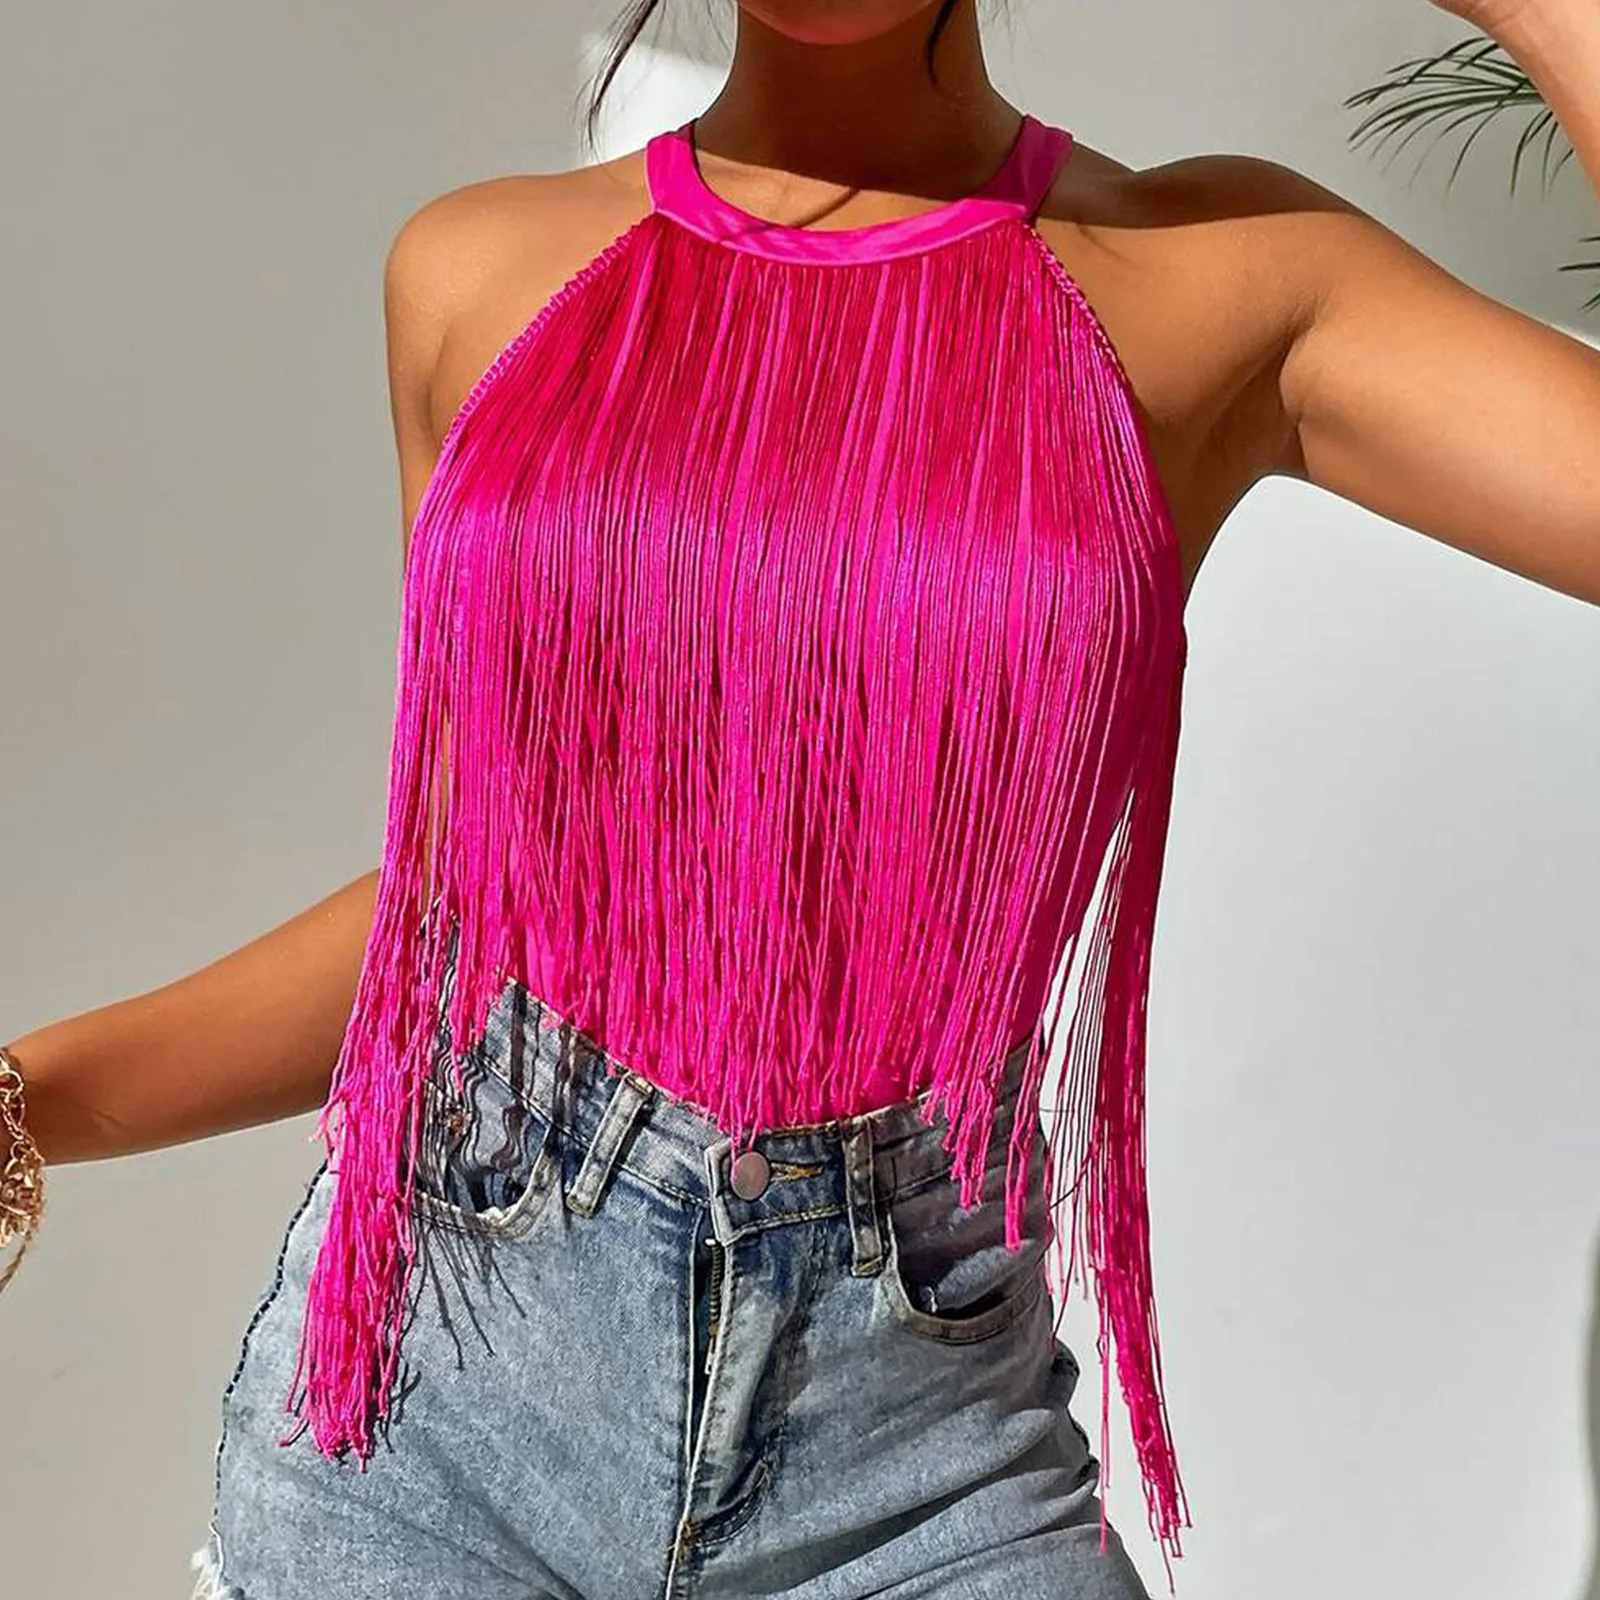 

Womens Halter Tassel Crop Top Sleeveless T-shirt Tops Sexy Fringe Vest Tops for Vacation Beach Cocktail Party Stage Performance